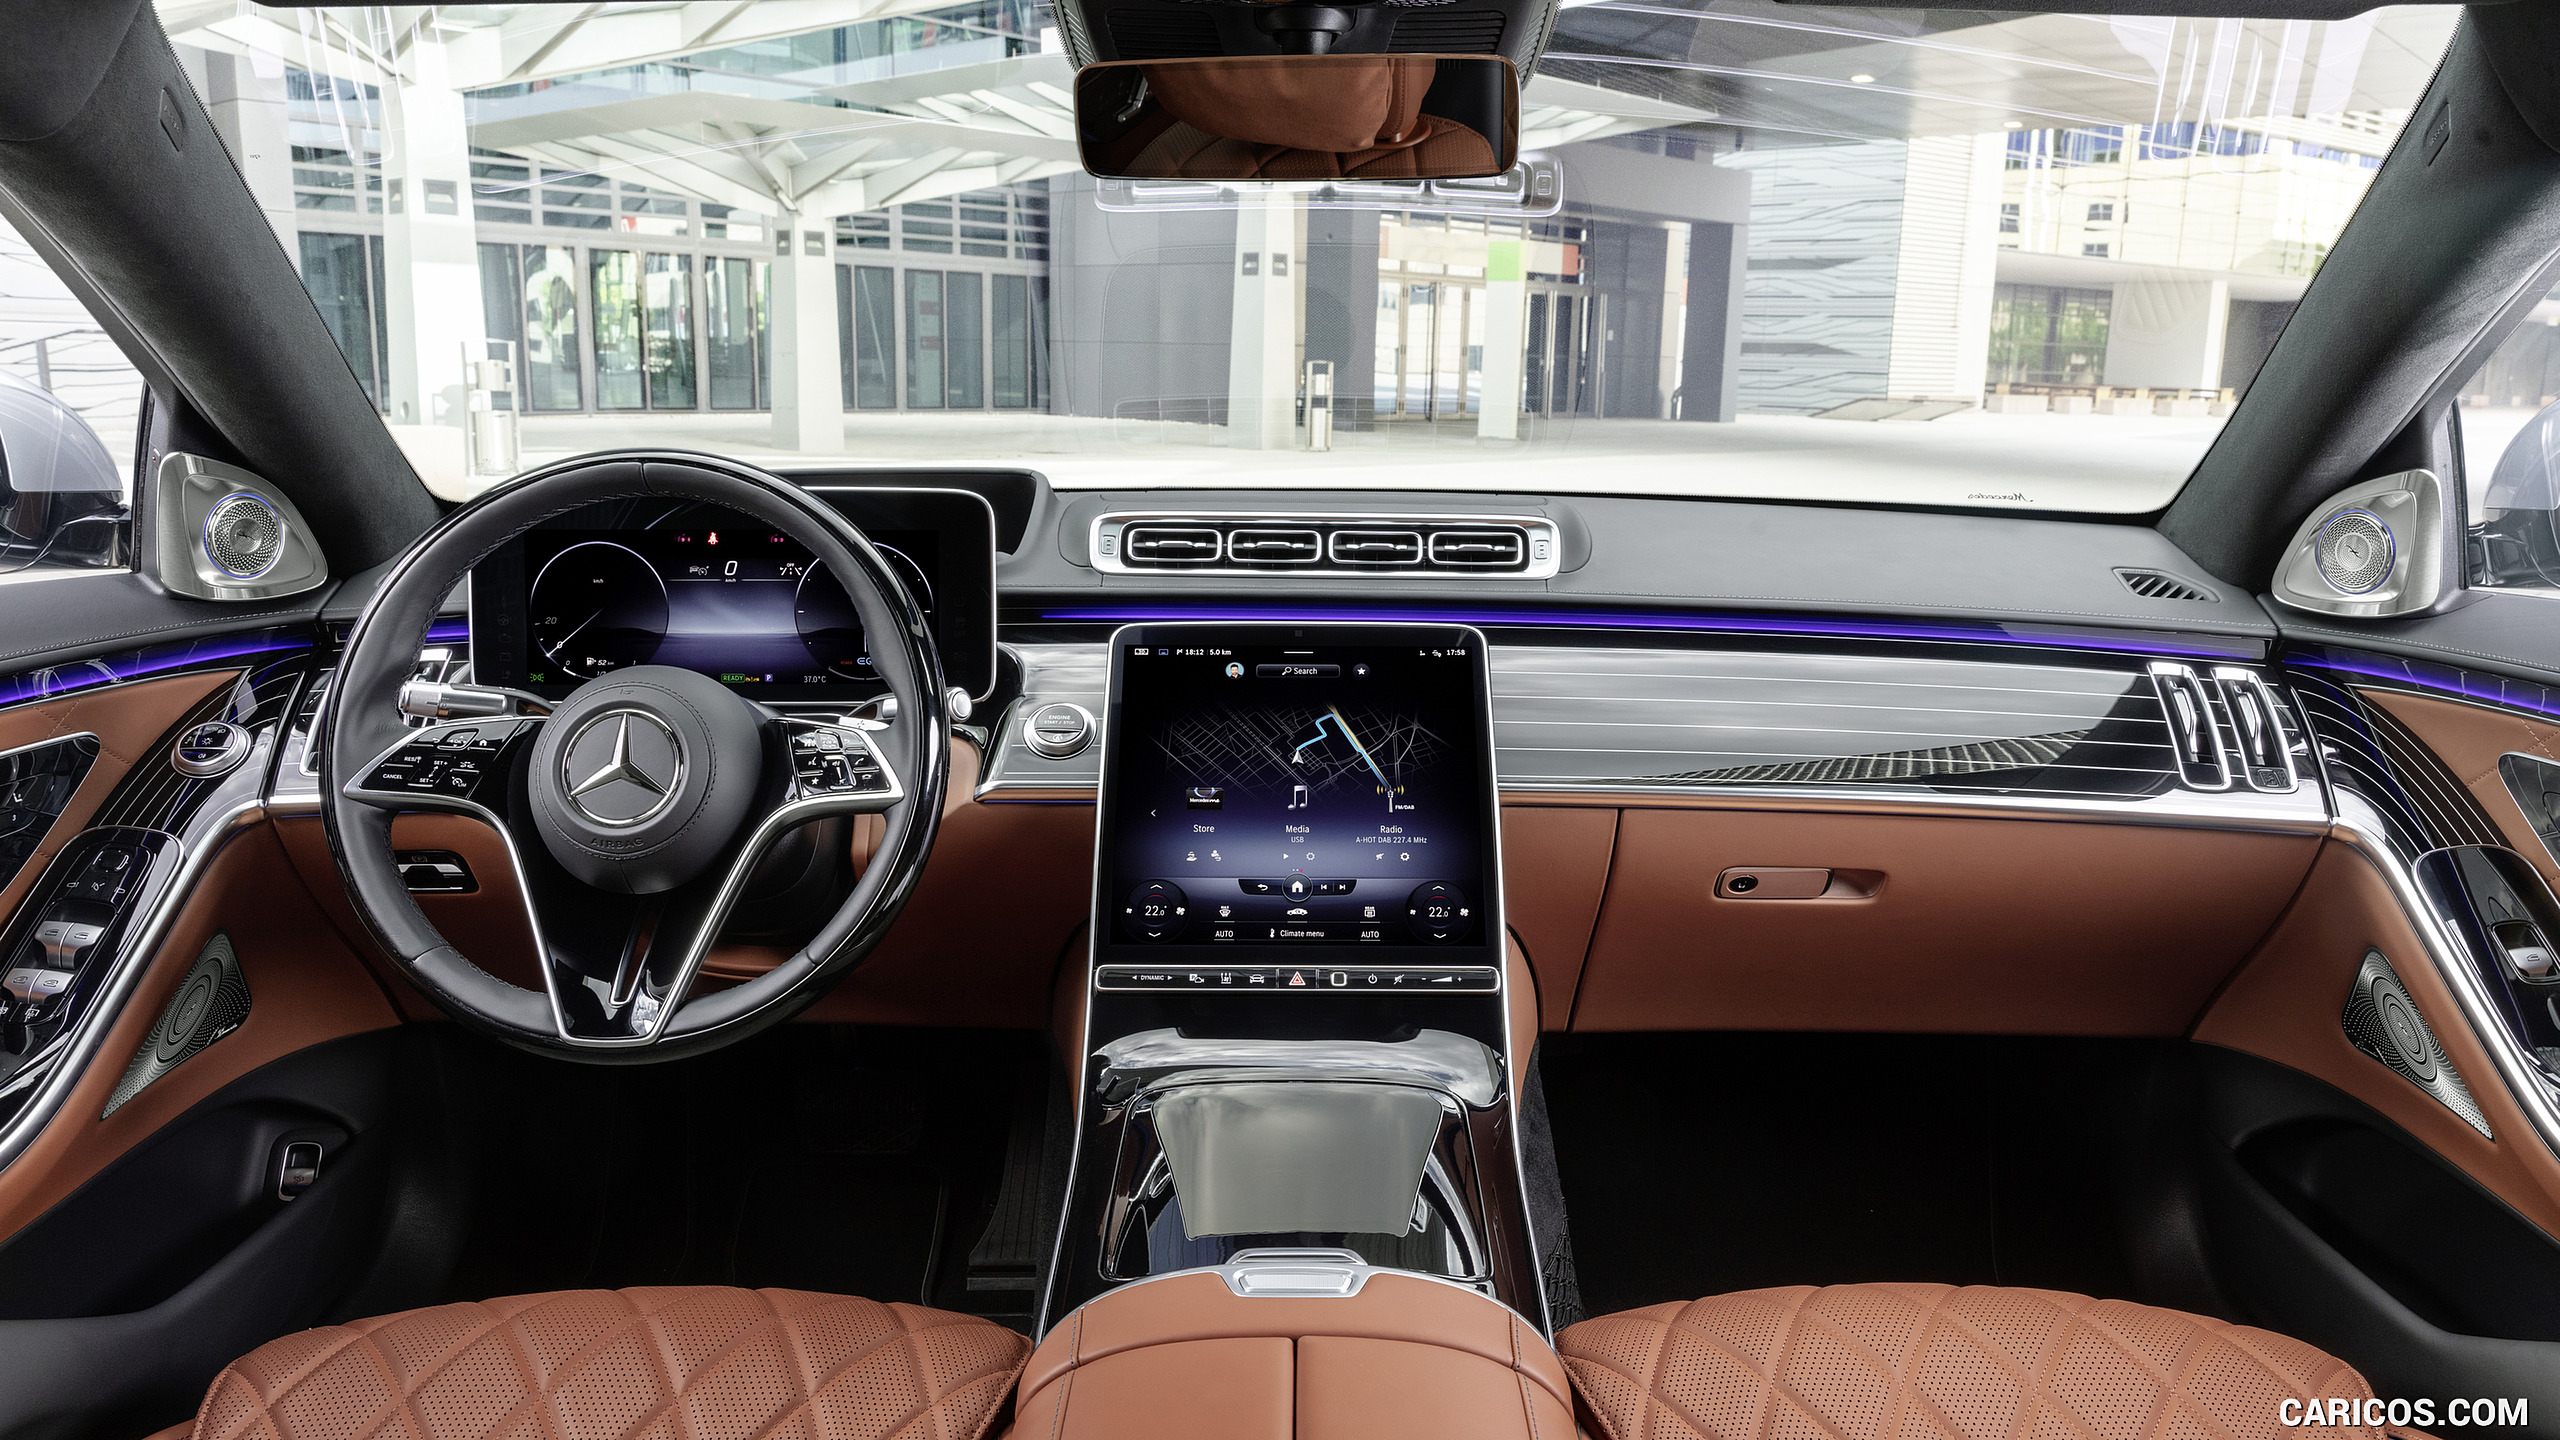 2021 Mercedes-Benz S-Class (Color: Leather Siena Brown) - Interior, Cockpit, #108 of 316